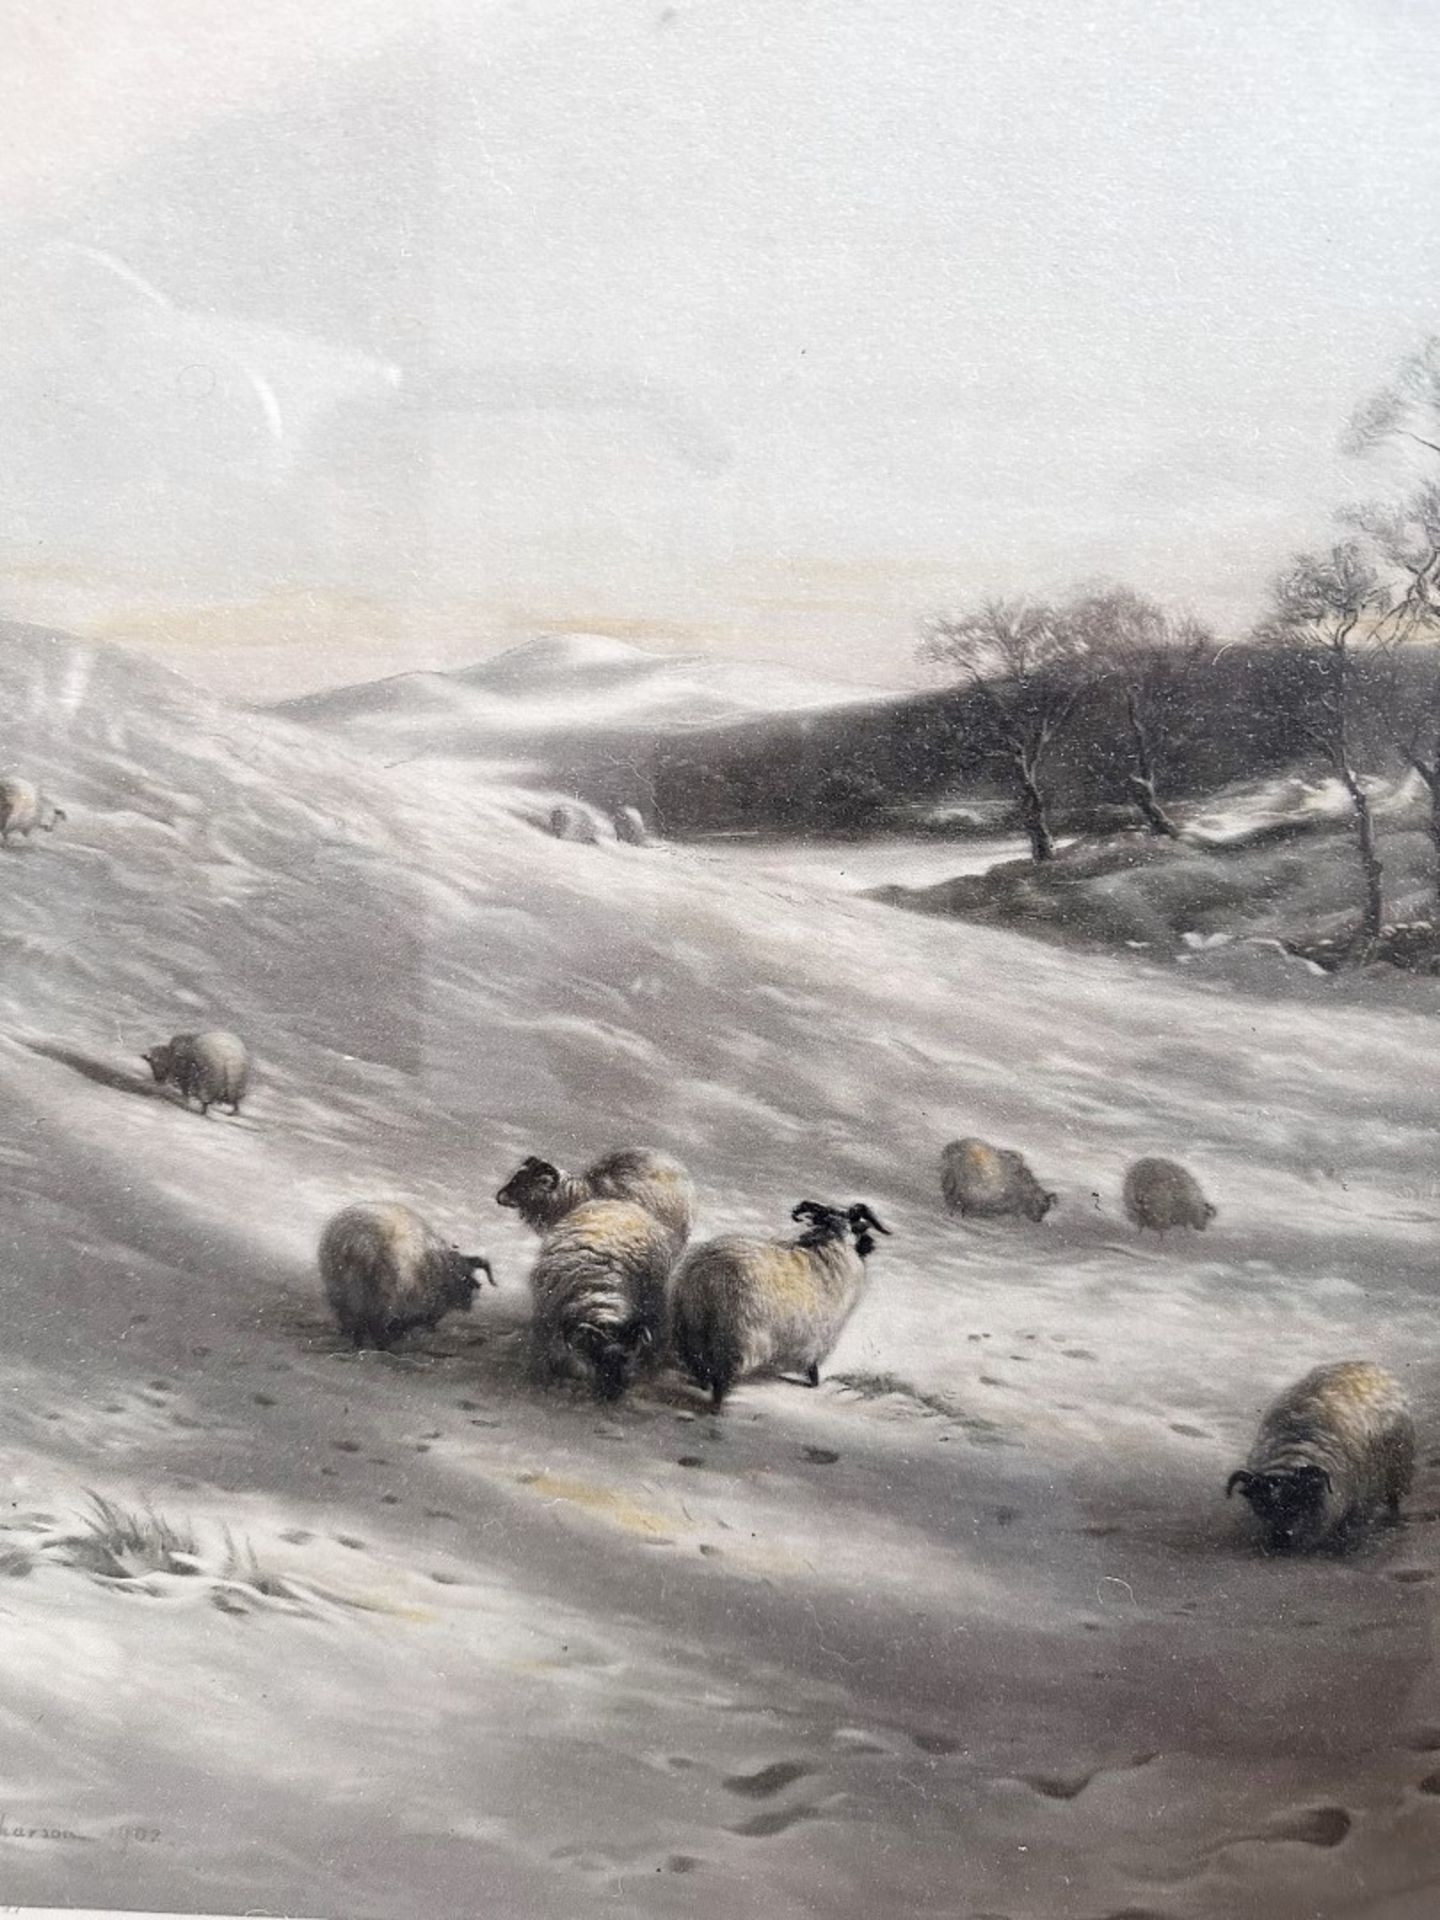 1 x JOSEPH FARQUHARSON (1846-19350) "Through The Crisp Air" Mounted And Framed - Image 4 of 8